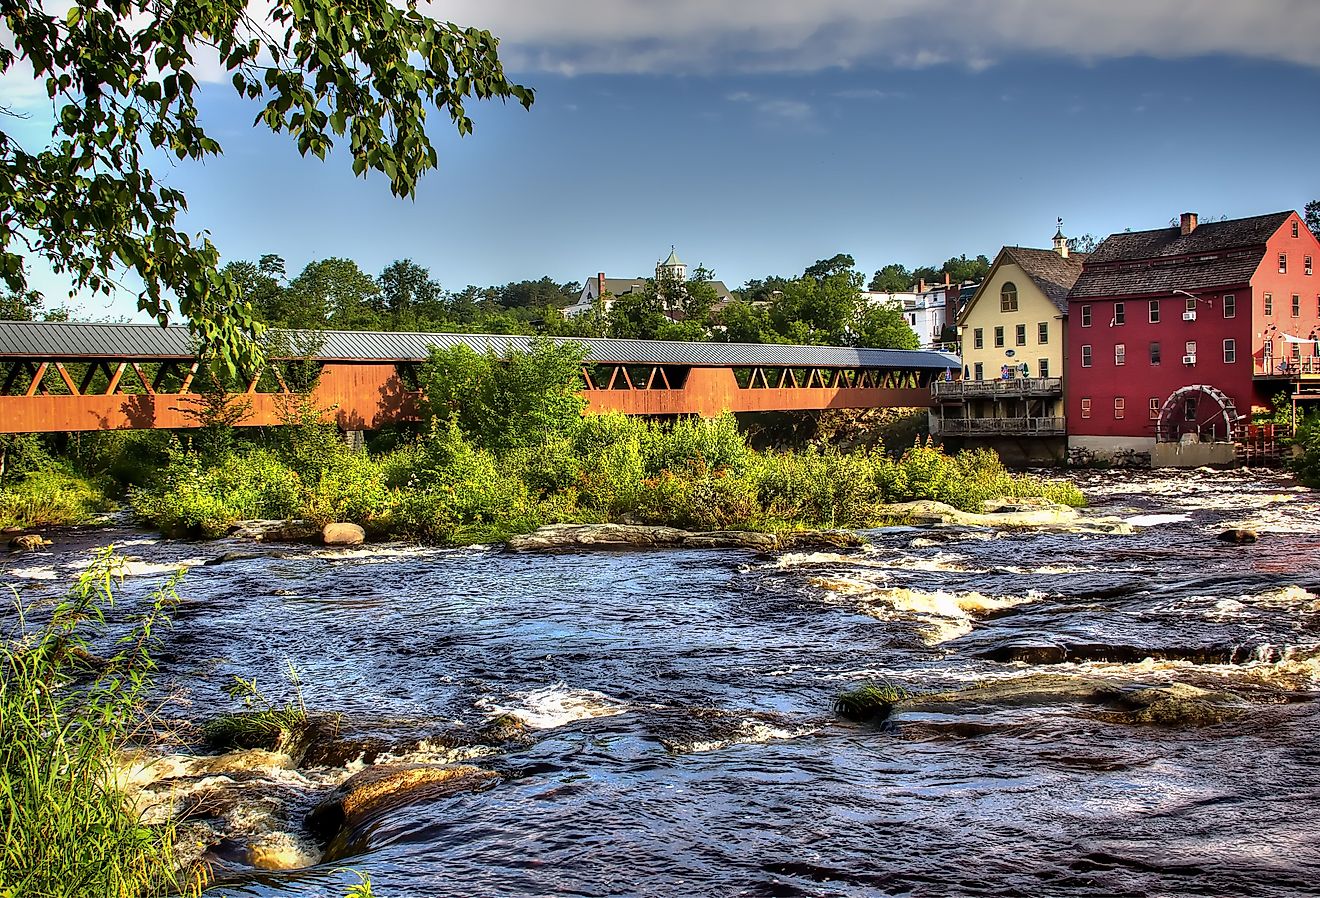 The River Walk overed bridge with the Grist Mill on the Ammonoosuc River in Littleton, New Hampshire.